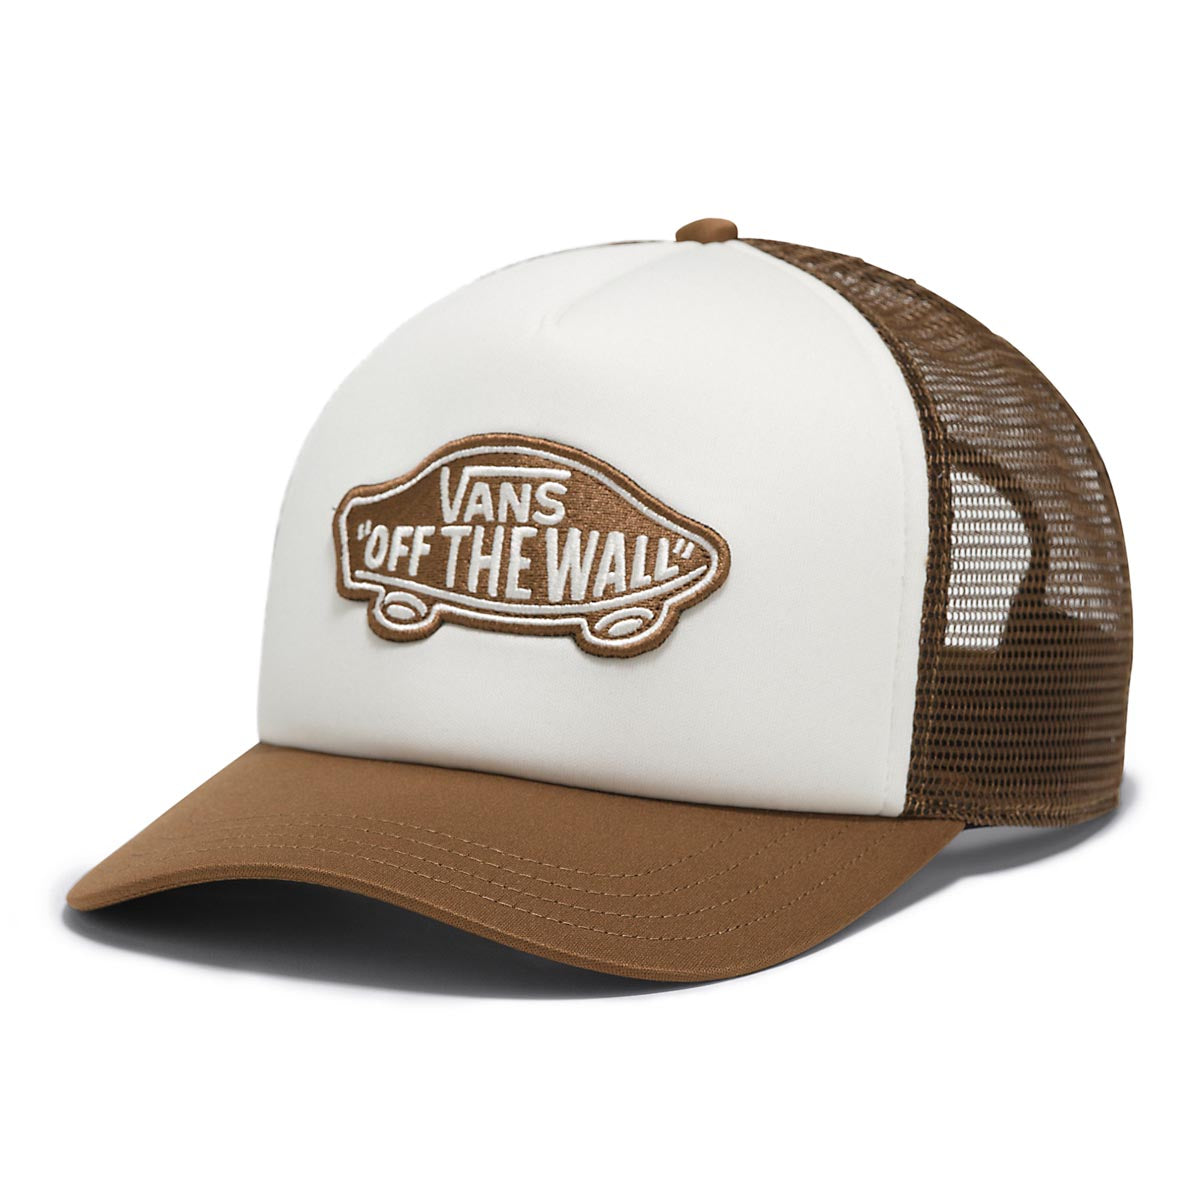 Vans Classic Patch Curved Bill Trucker Hat - Coffee Liqueur image 1